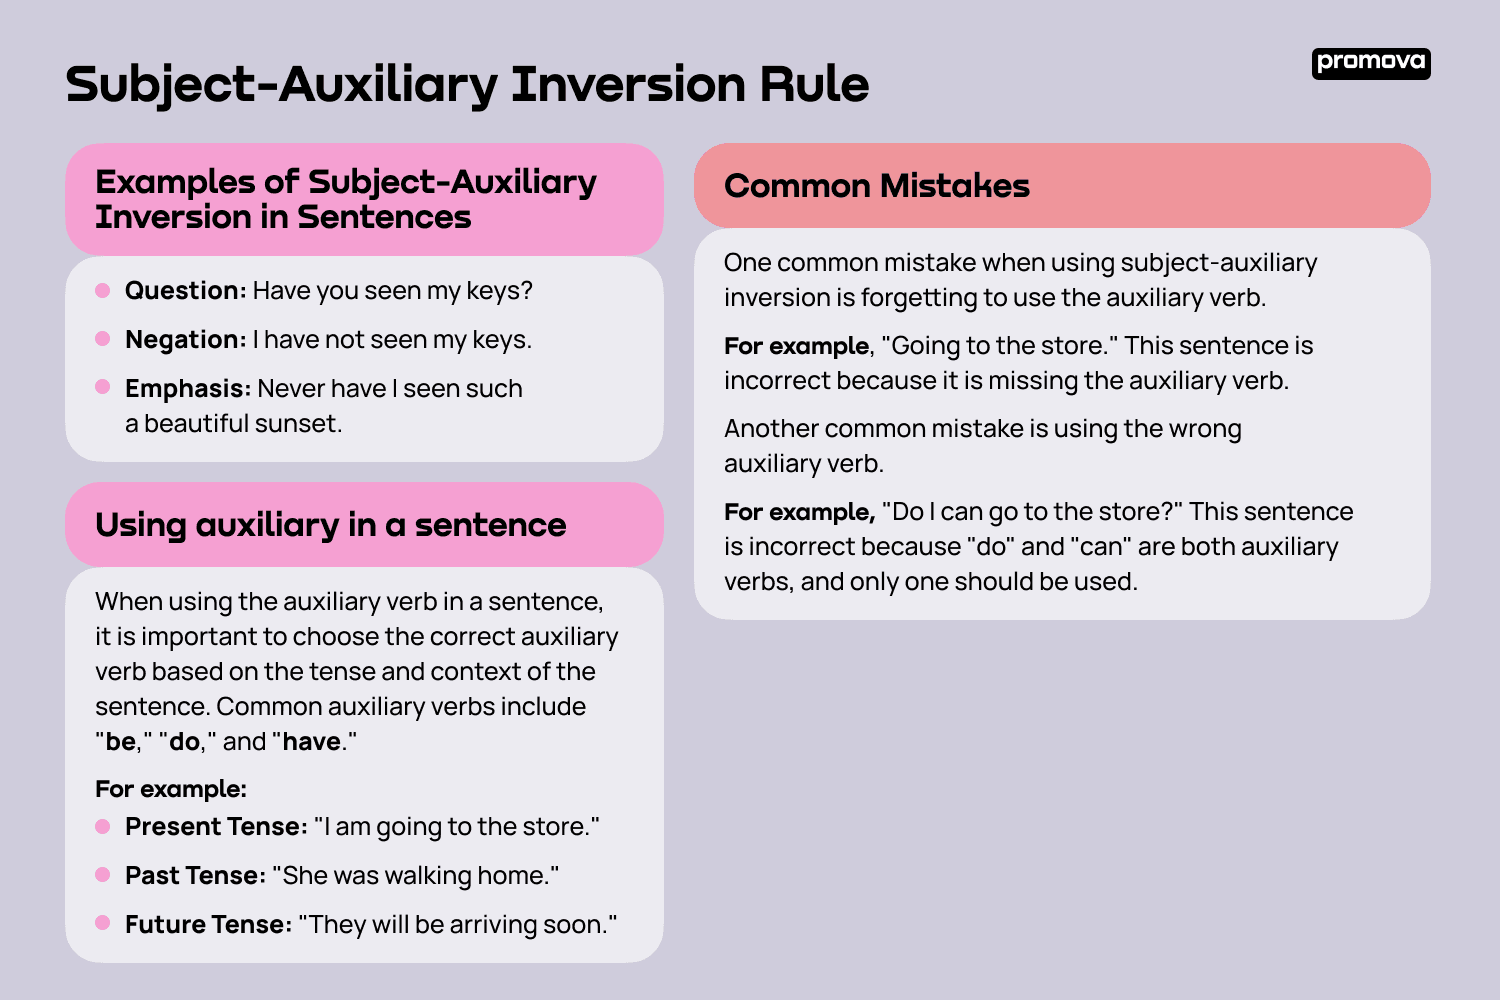 Examples of Subject-Auxiliary Inversion in Sentences